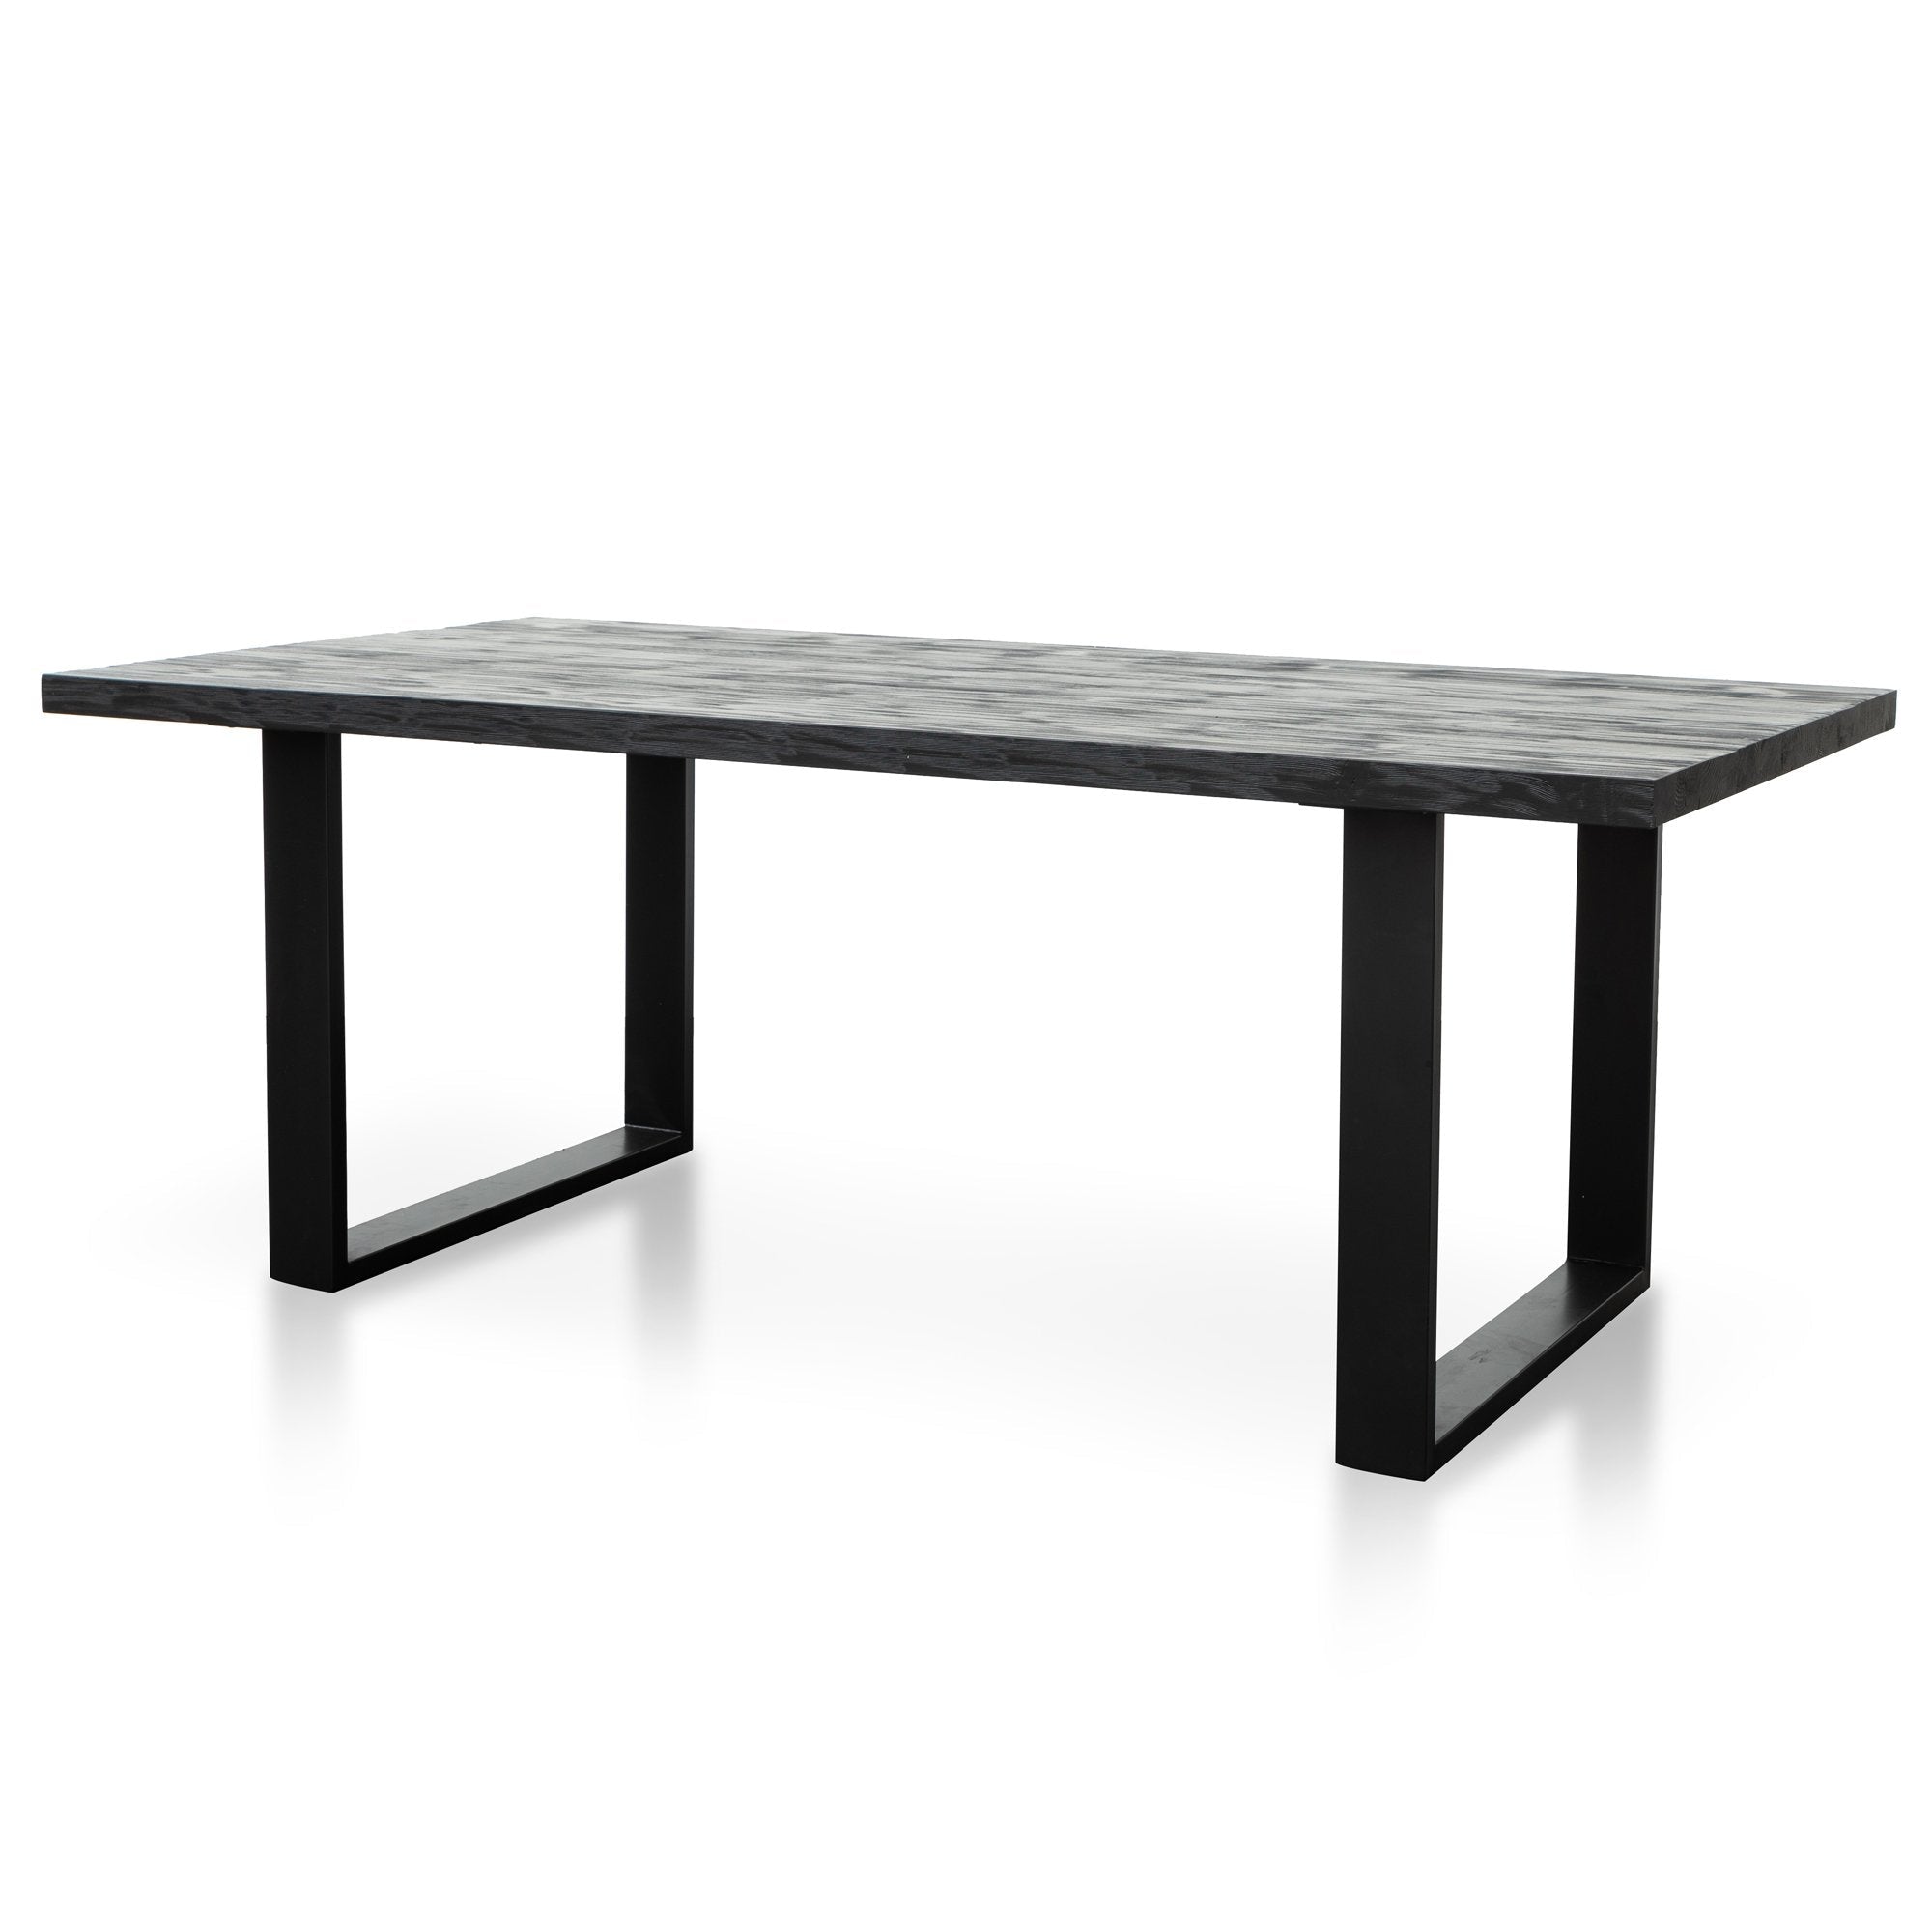 2m Reclaimed Wood Dining Table - Black